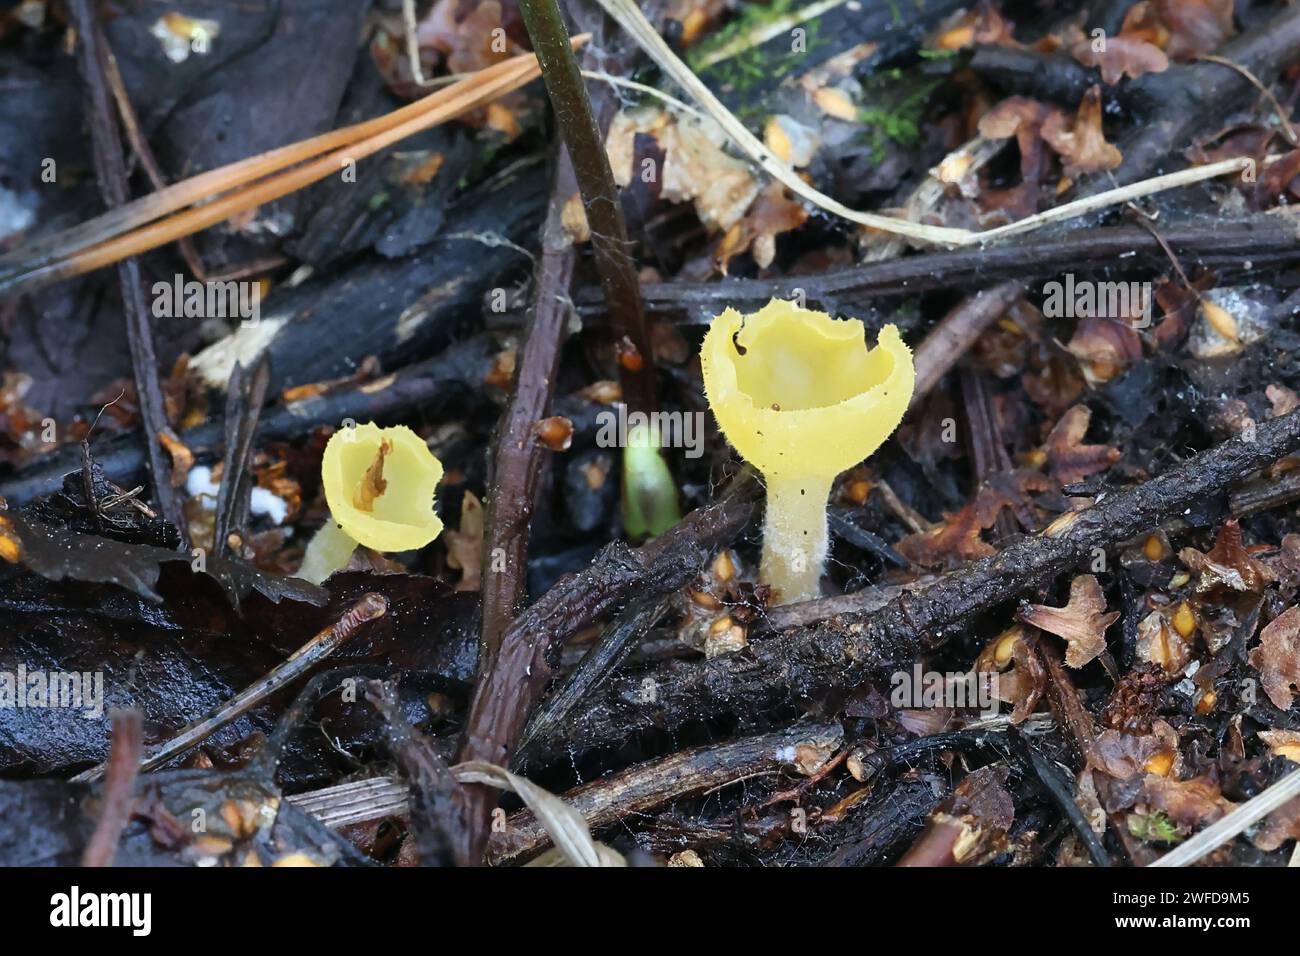 Sowerbyella radiculata, yellow cup fungus from Finland, no common English name Stock Photo